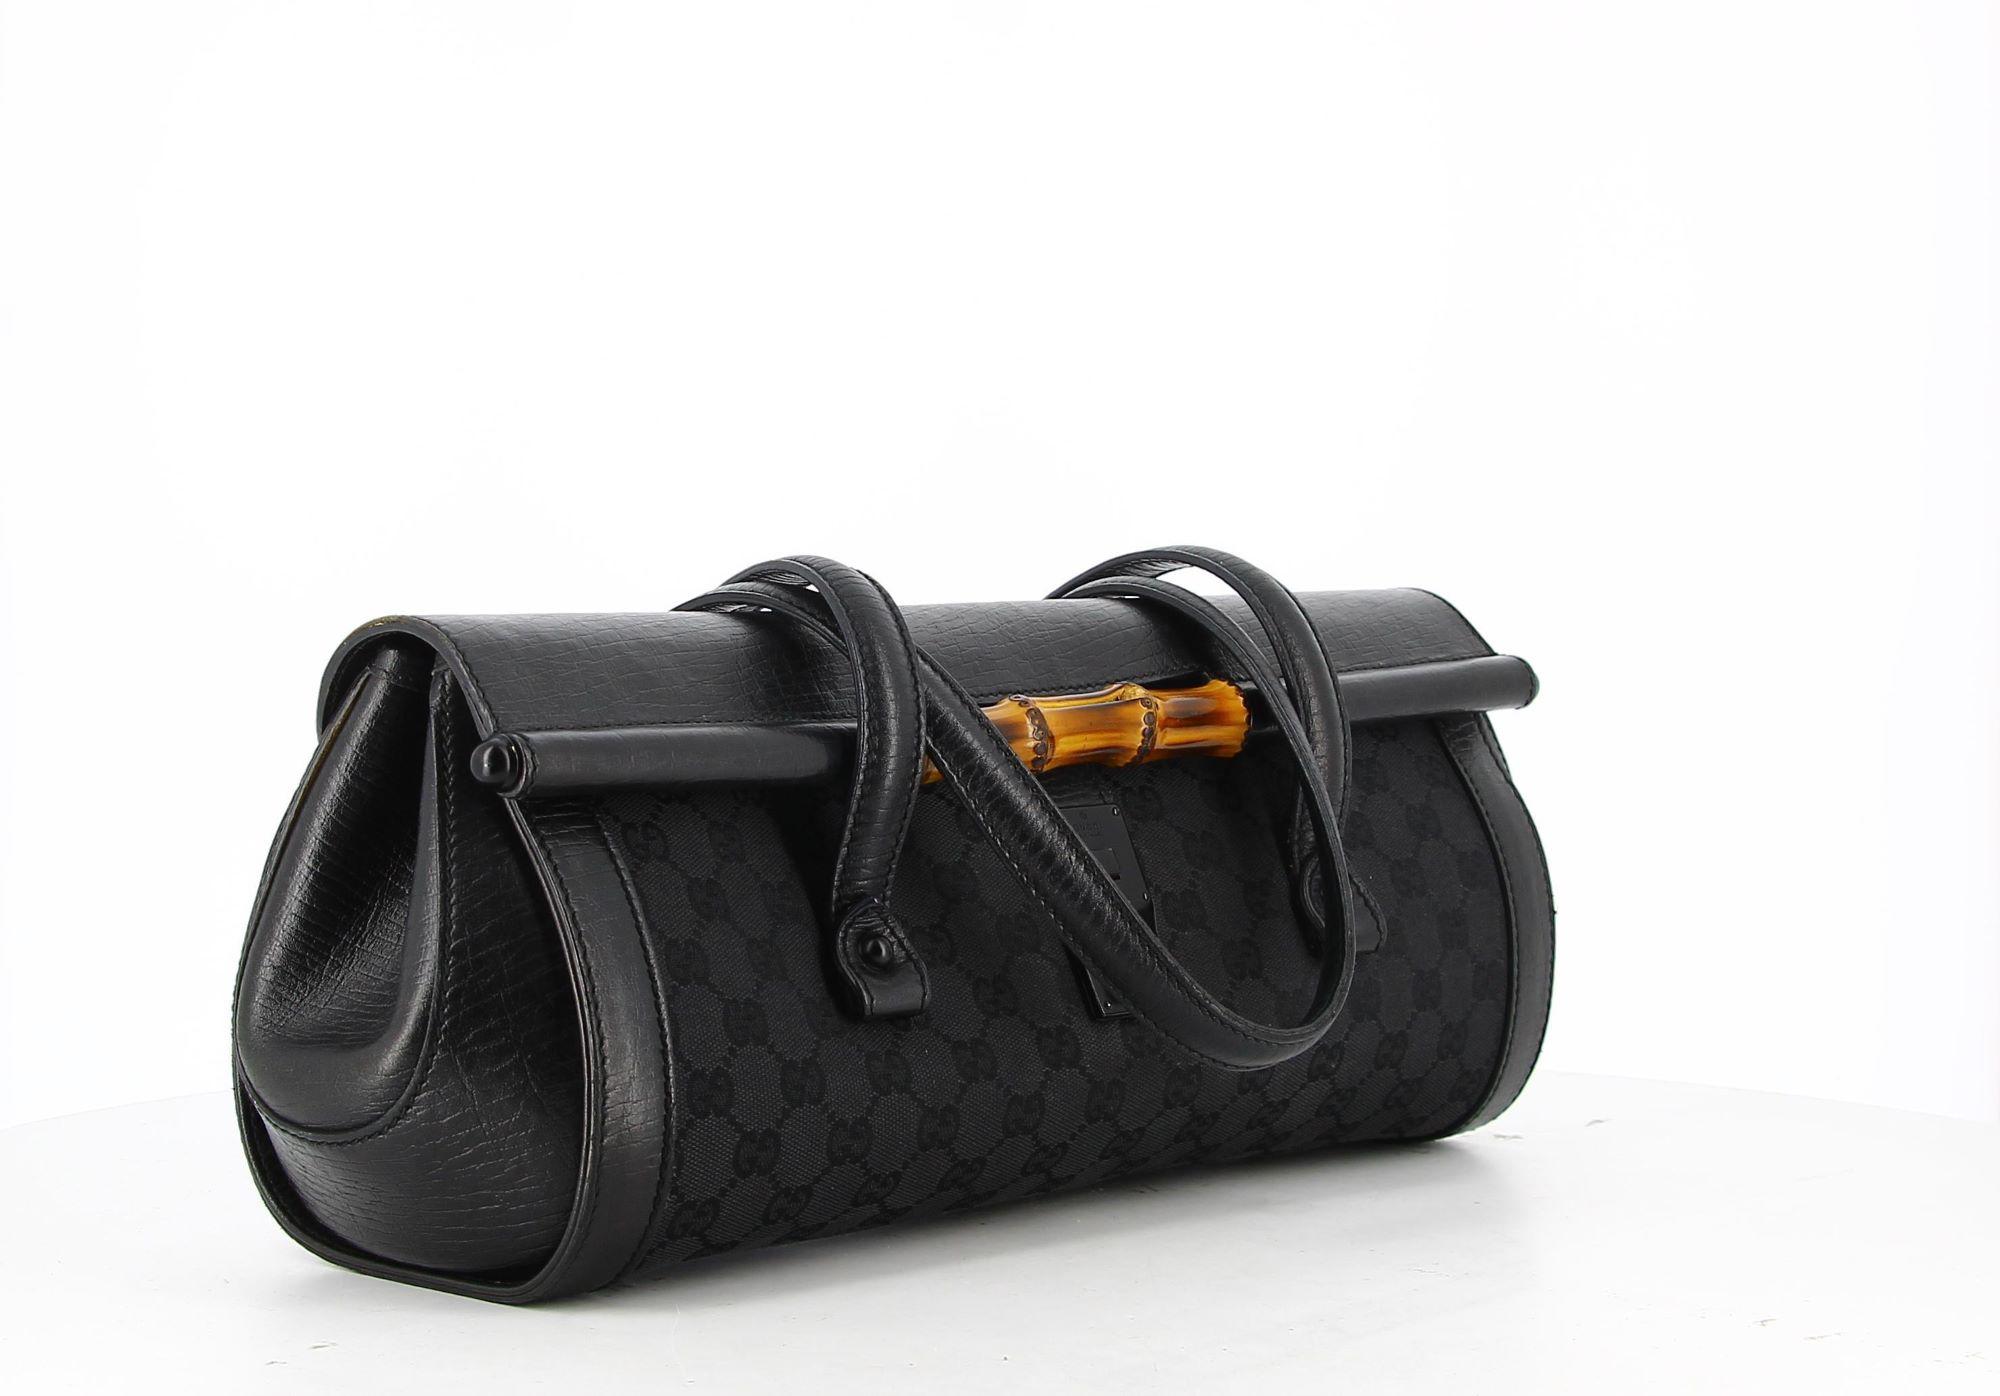 Gucci Black Canvas Bamboo Bullet Shoulder Bag.
Very good condition show some light signs of use and wear but nothing visible ! A beautiful piece to add in your closet.
Gucci bullet bag in a monogramed canvas and leather.
Height 15 cm
Width 31 cm